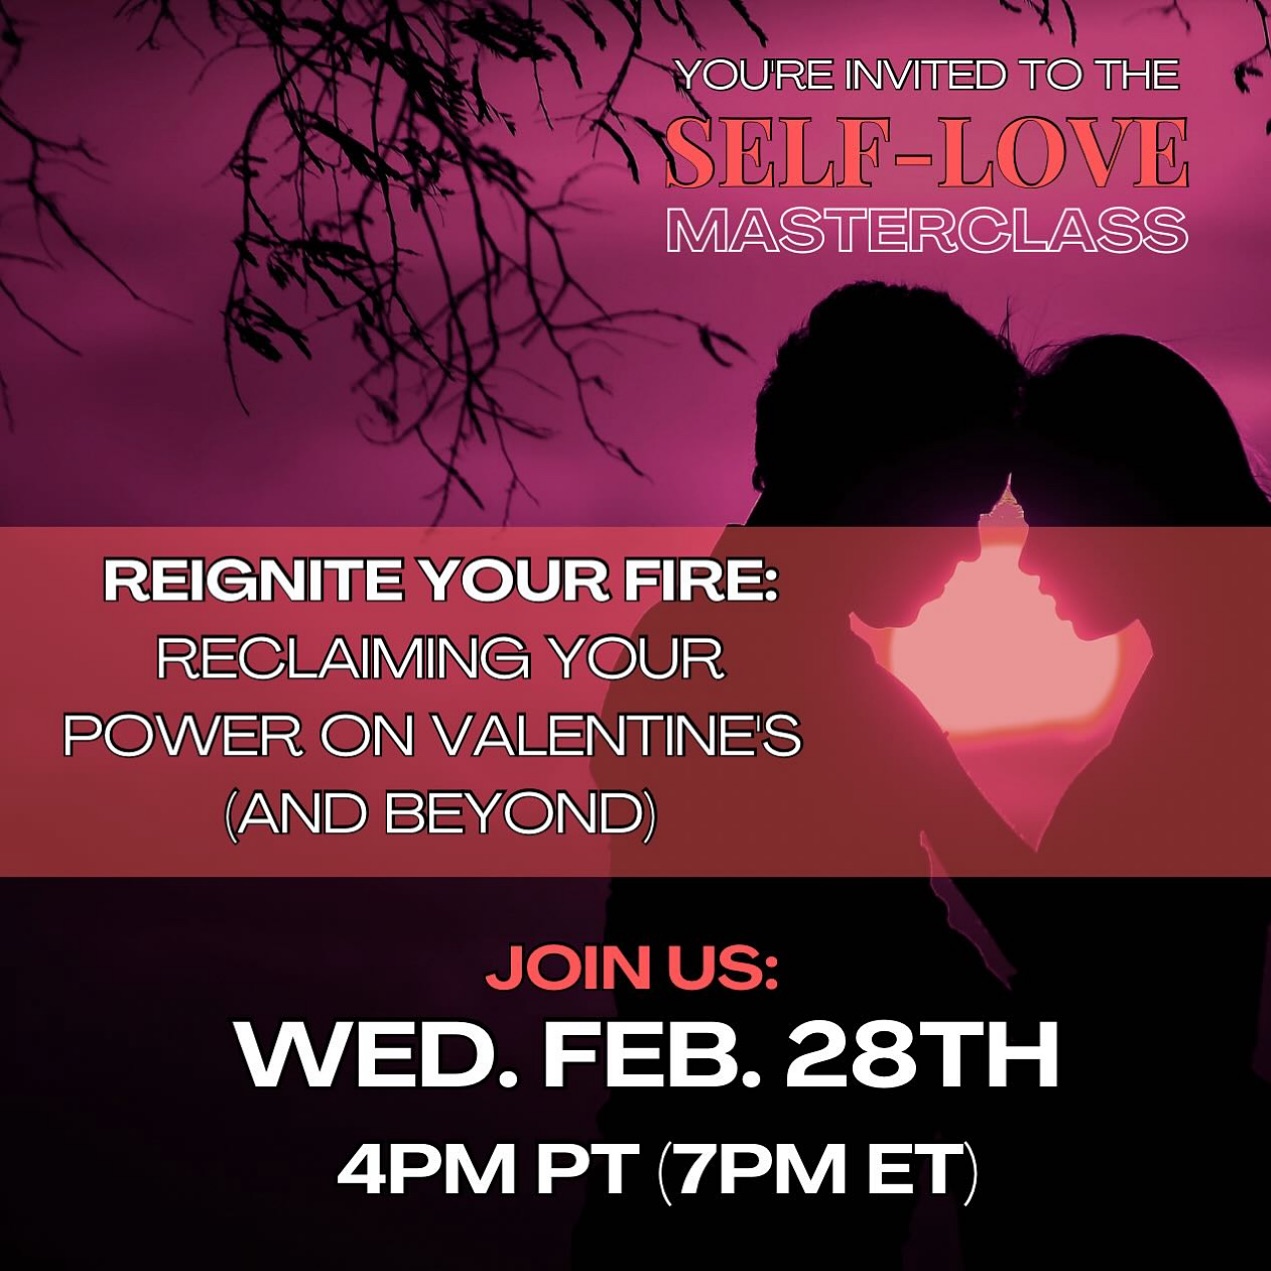 Feeling single during this month of love? Or maybe your relationship feels a little meh? * This one’s for YOU! Join certified Hypnotherapists AJ Yager & Samm Murphy for a Masterclass: Reignite Your Fire: Reclaiming Your Power on Valentine’s Day (and beyond)
Learn to unleash your inner rockstar, attract positive connections, and create epic Valentine’s Day memories no matter your relationship status. Register now in bio! #selfloverevolution #selfmastery #selflove #motivation